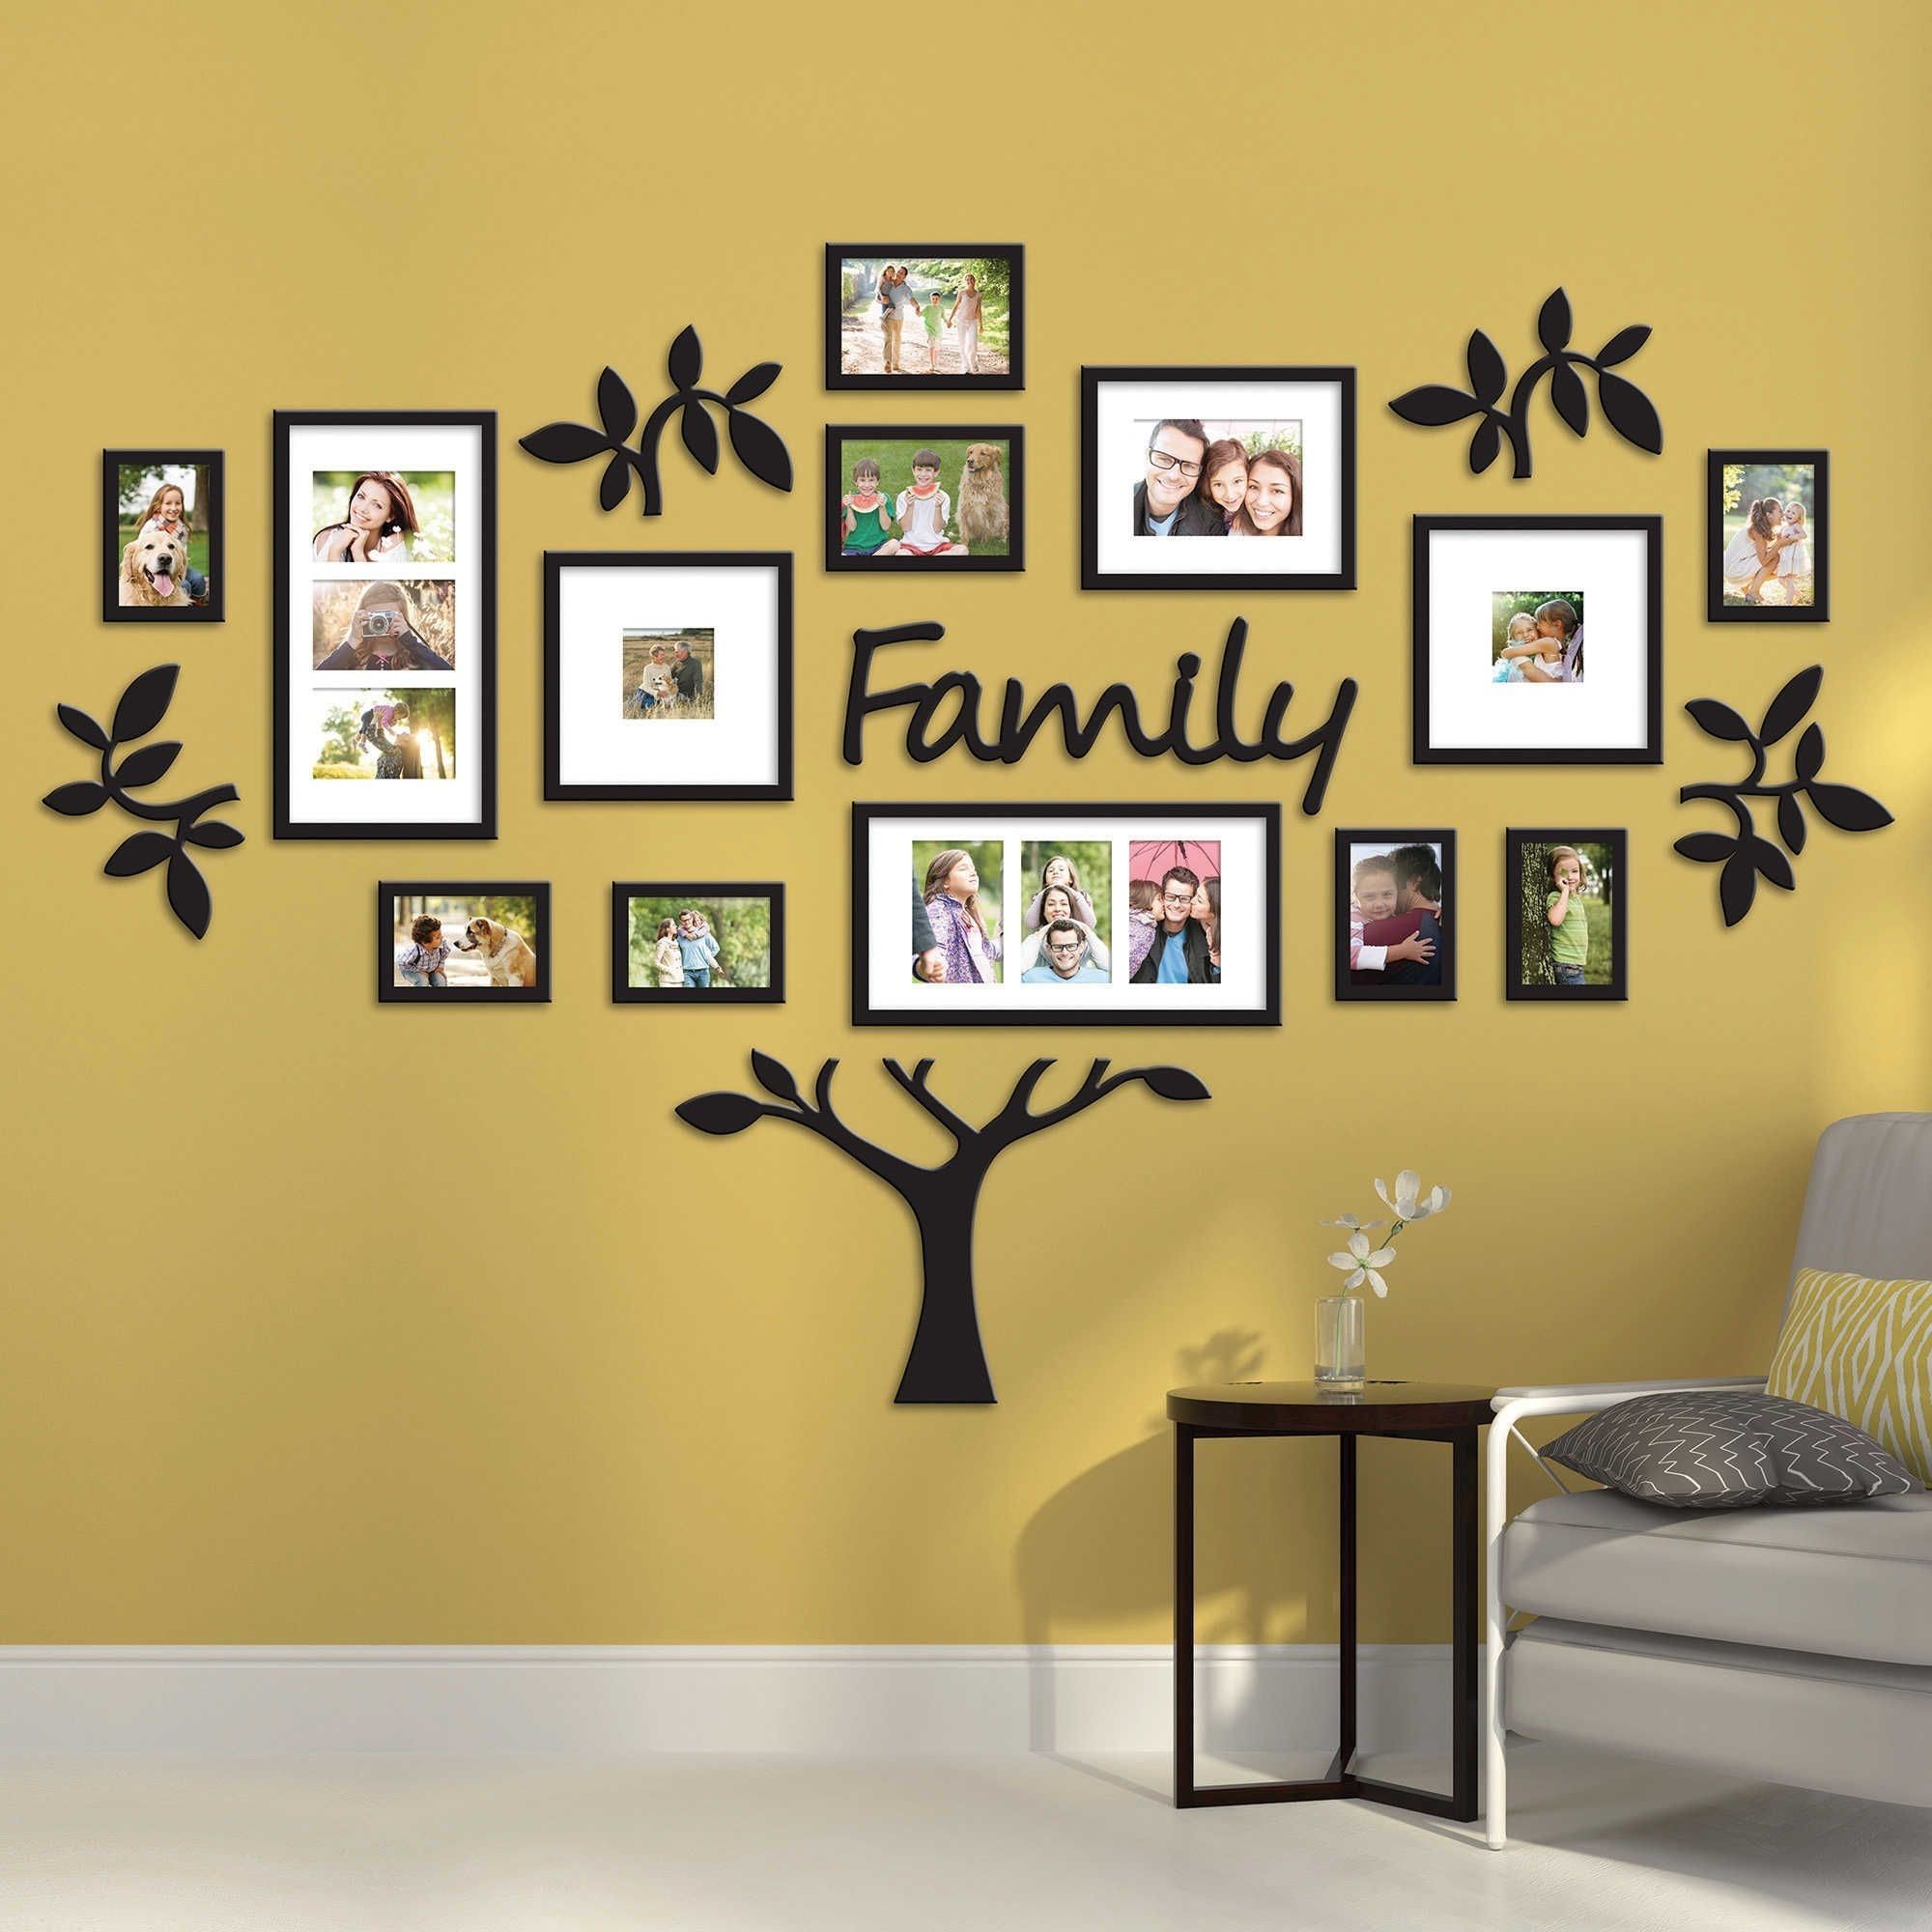 Wallverbs™ 19 Piece Family Tree Set | Home Decor Inspiration Throughout Family Tree Wall Art (View 6 of 20)